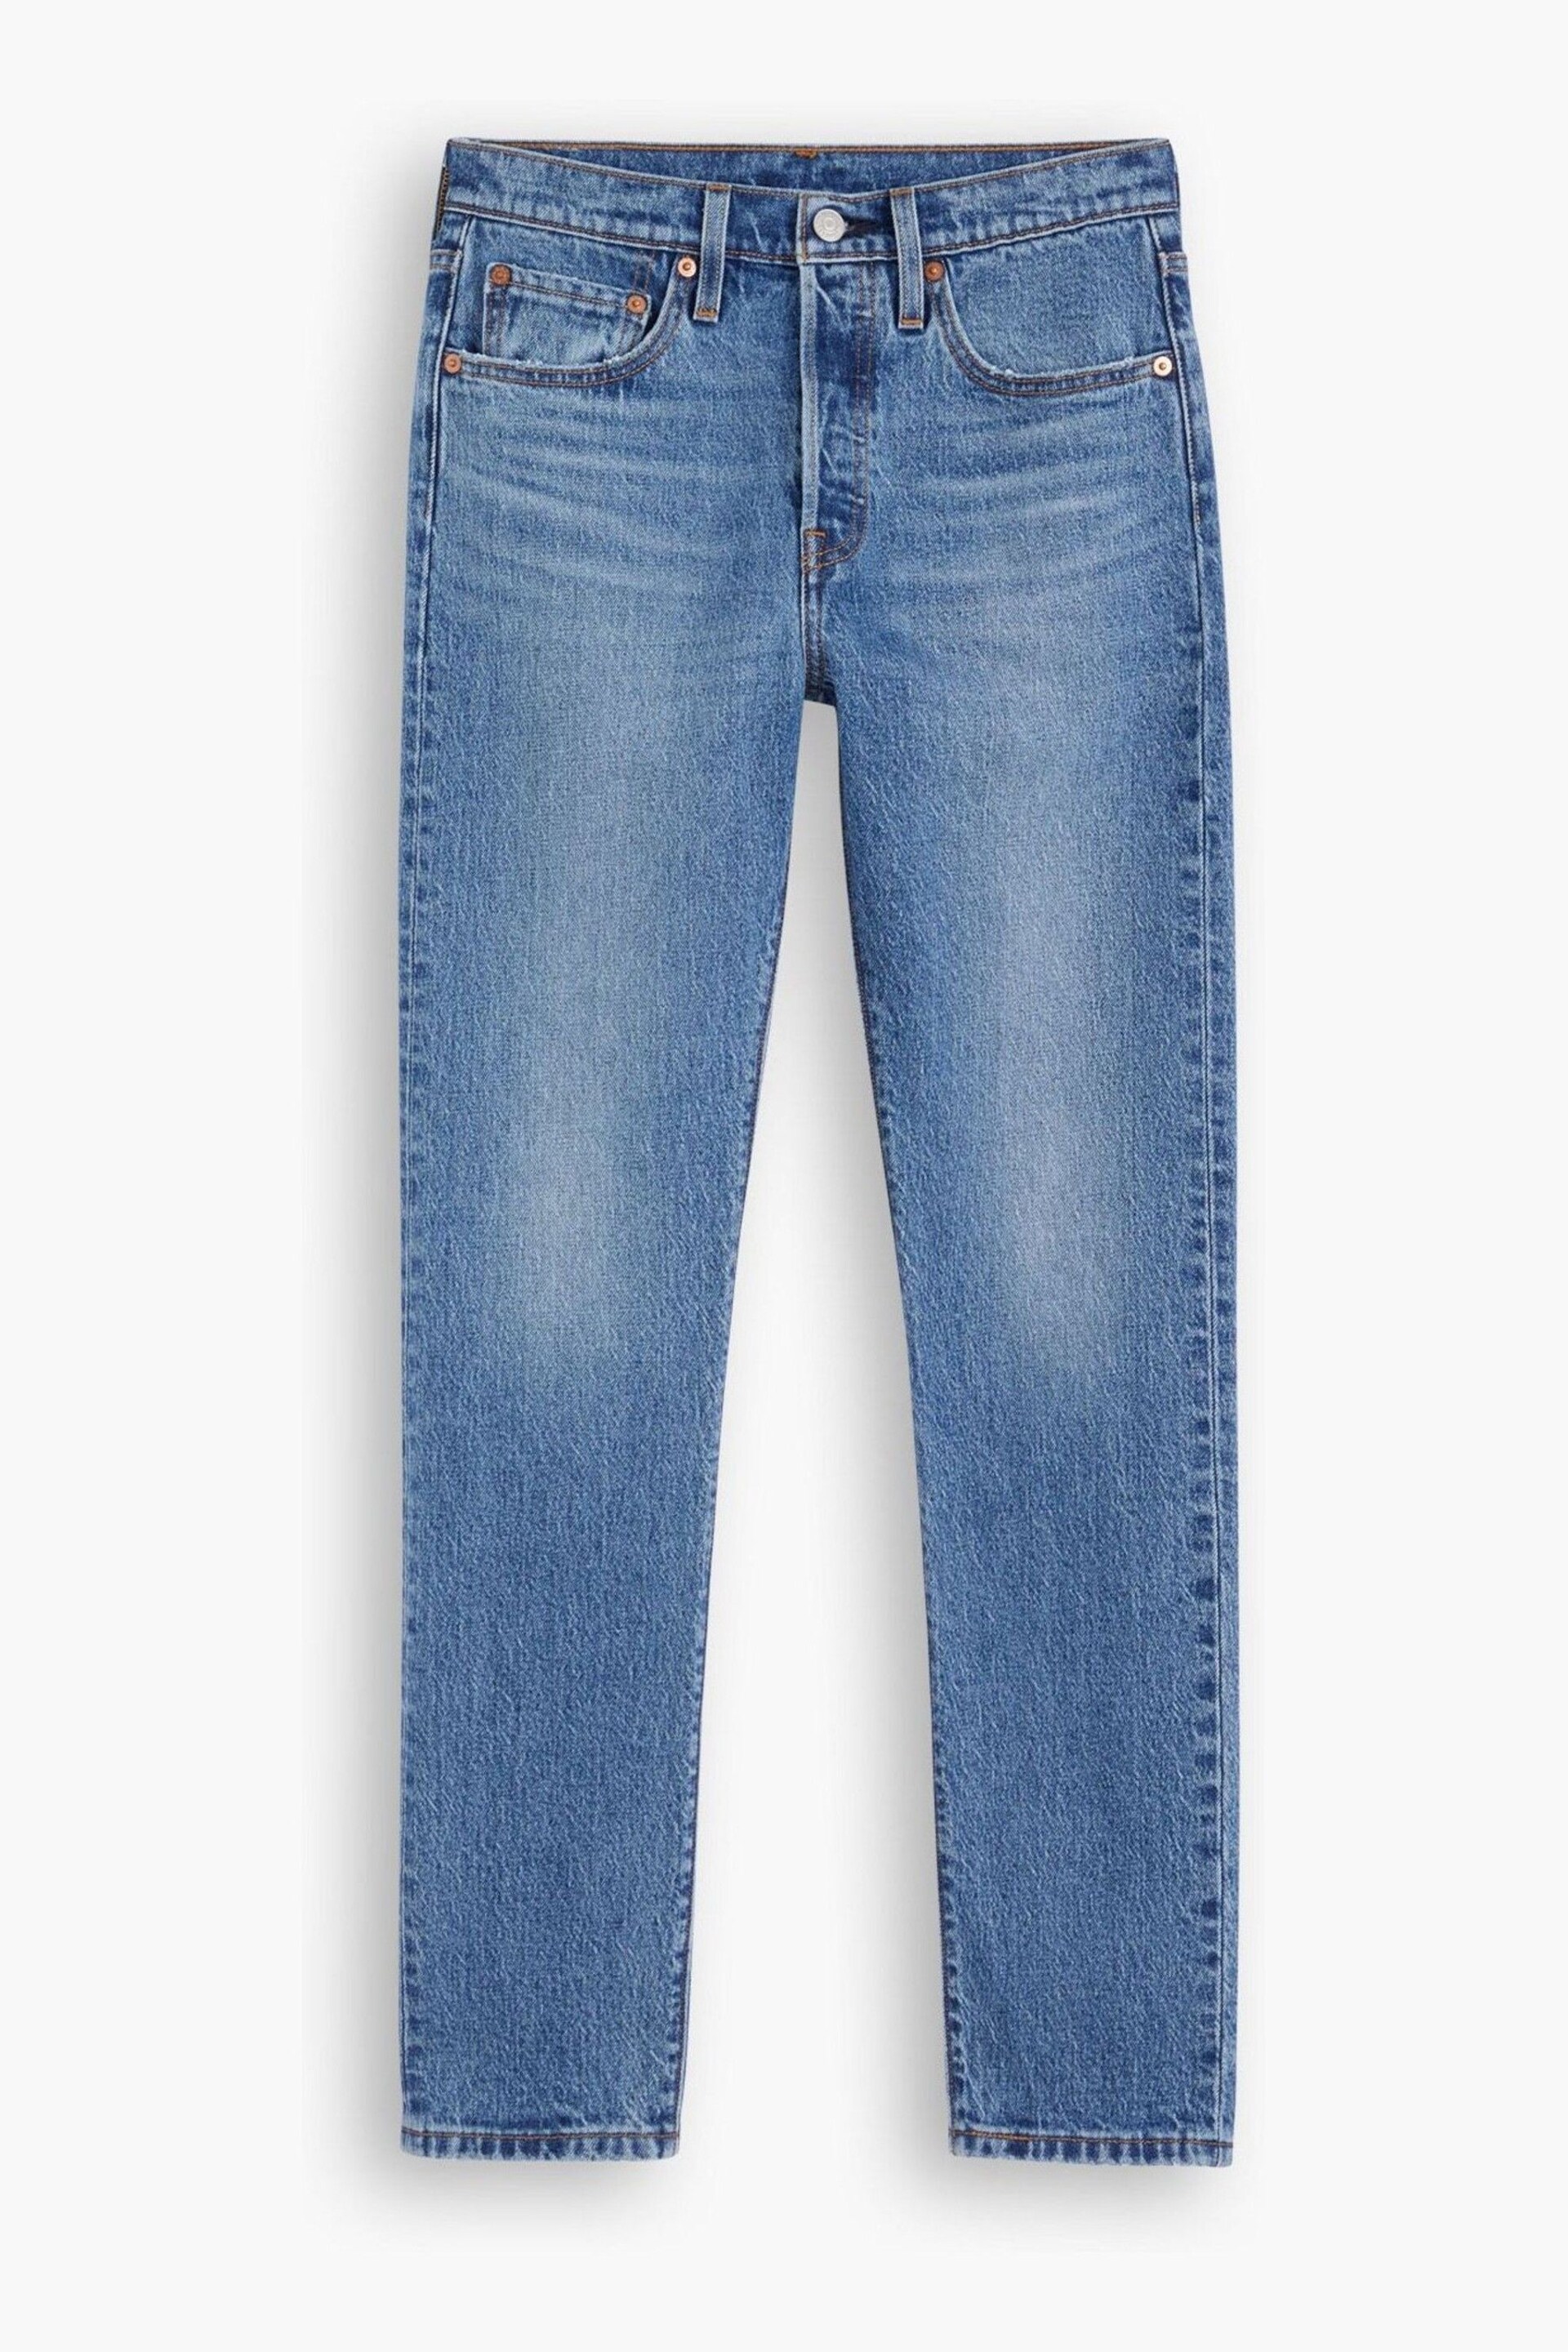 Levi's® Blue Its True Light Wash Blue 501® Youth Skinny Jeans - Image 6 of 8